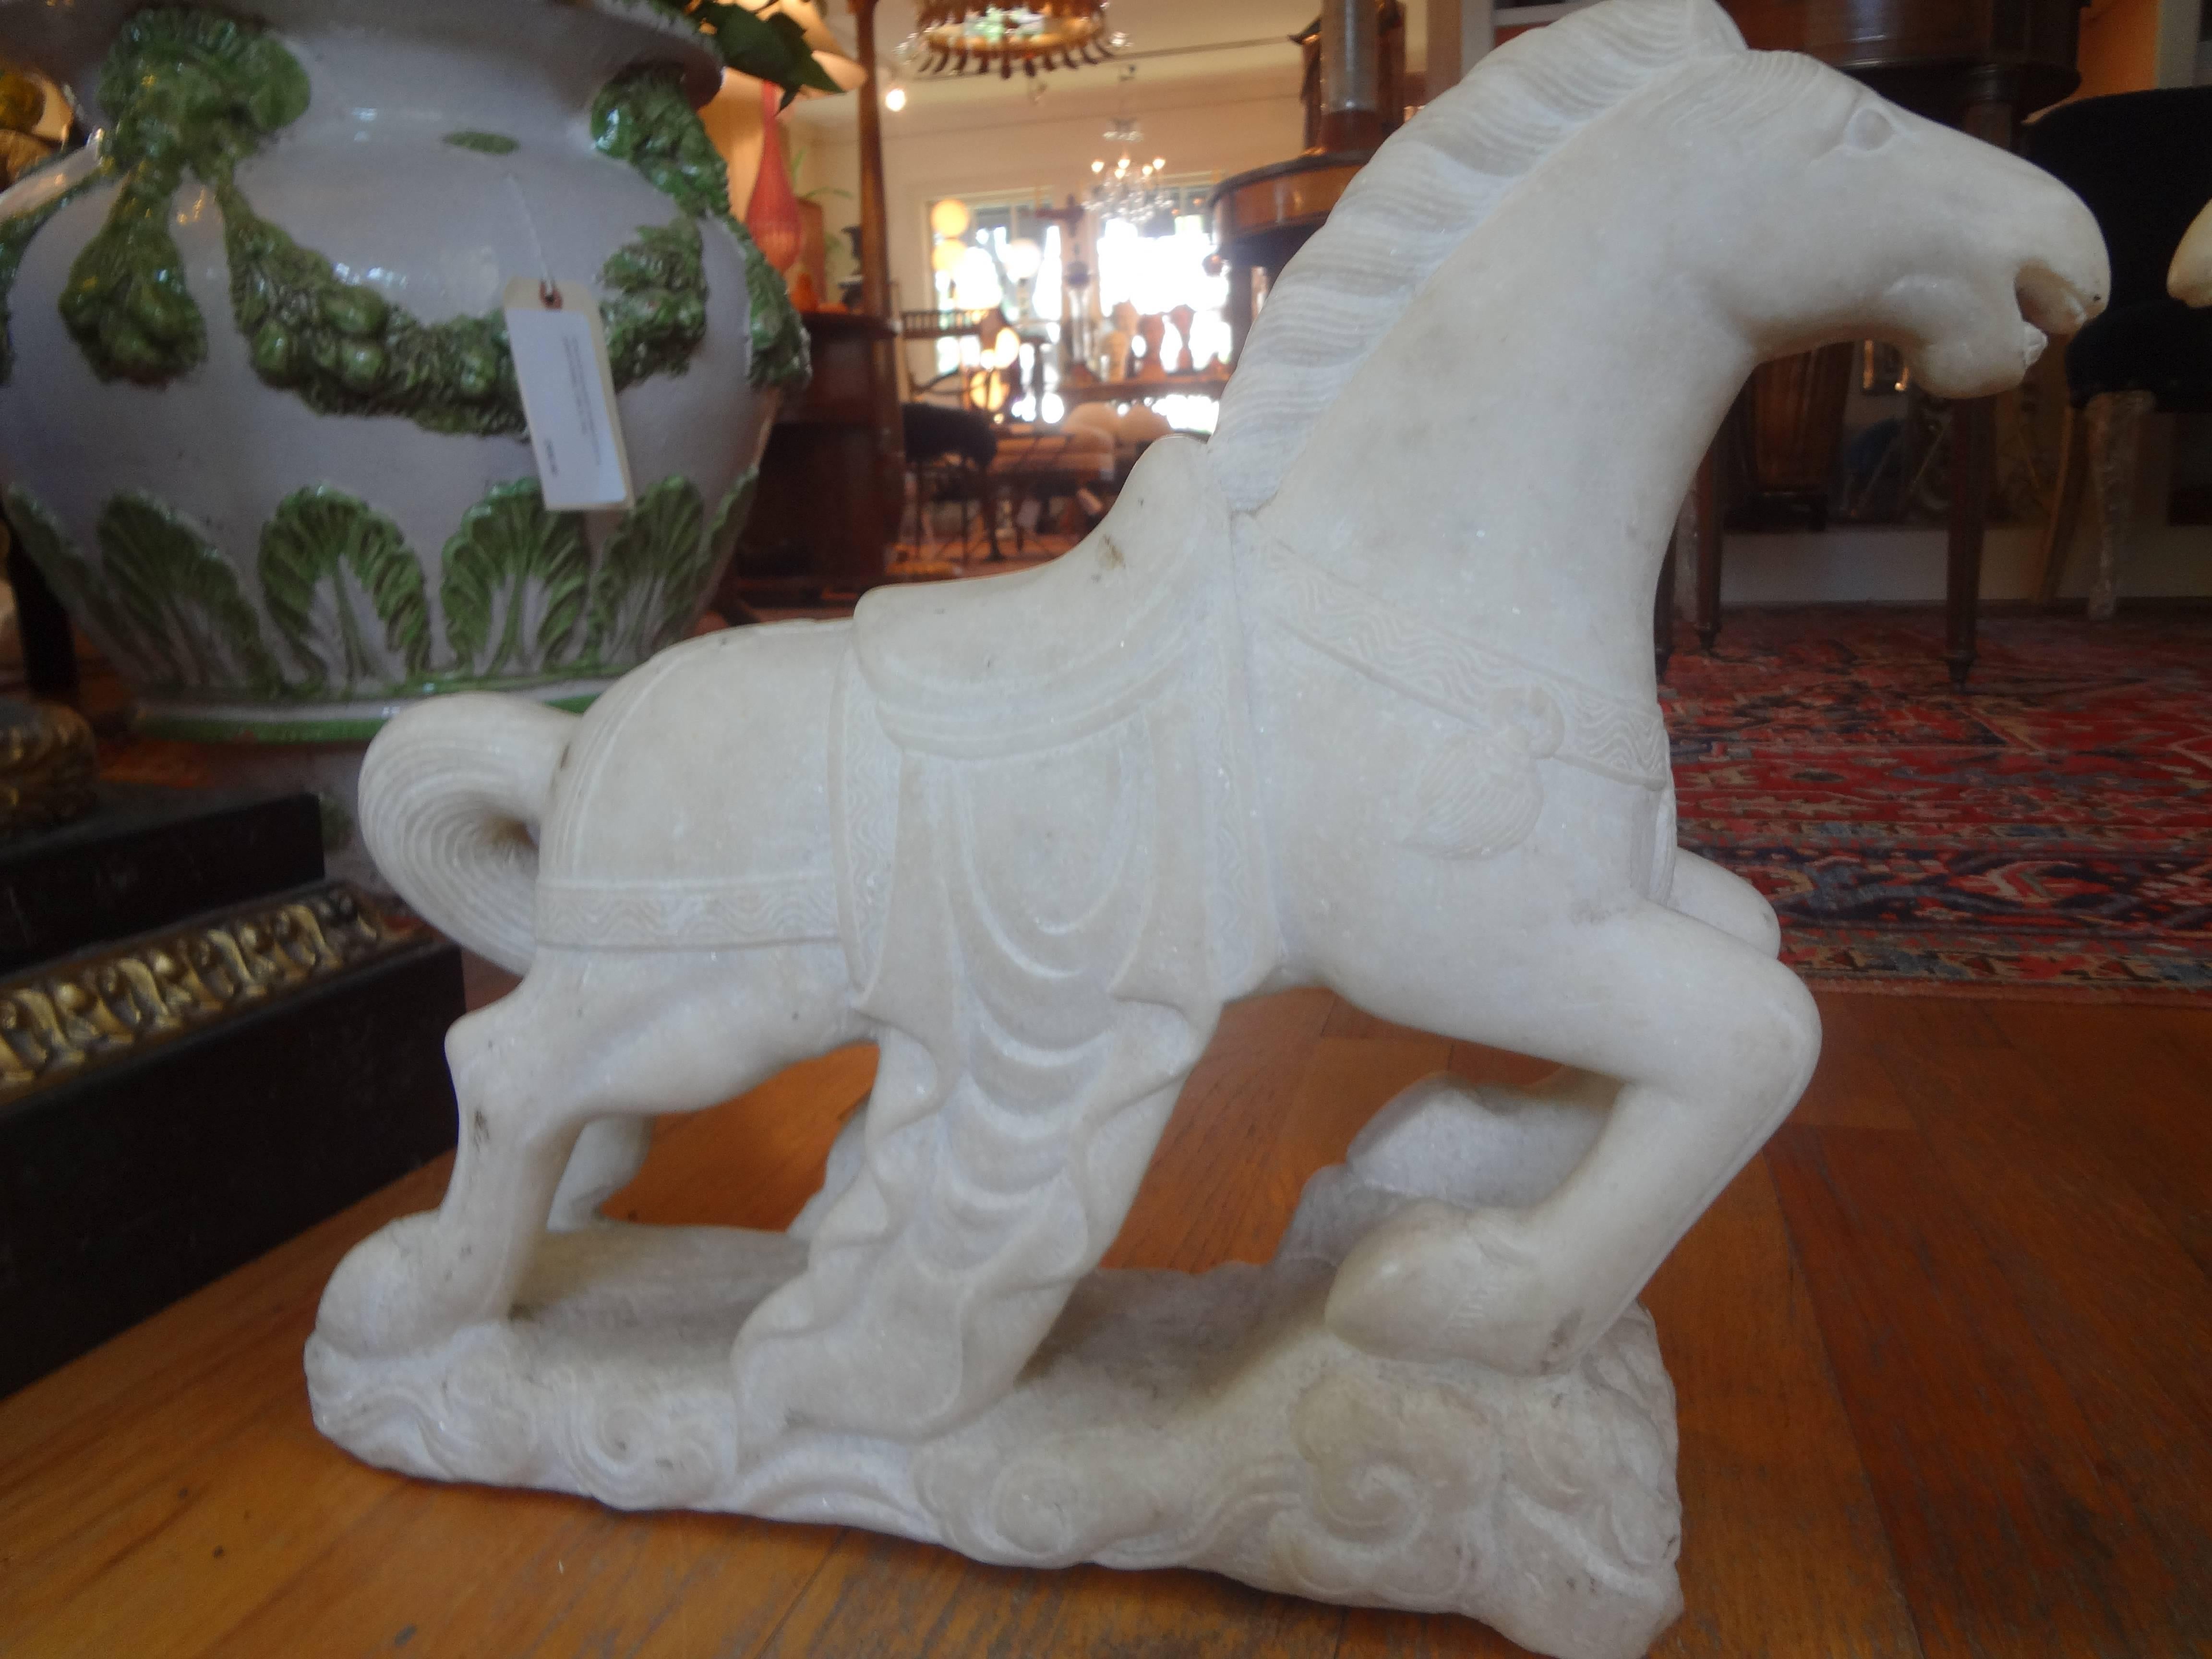 Pair of carved marble horses, circa 1920. This matched pair of marble horse sculptures are very well executed and have a great stylized Art Deco design.